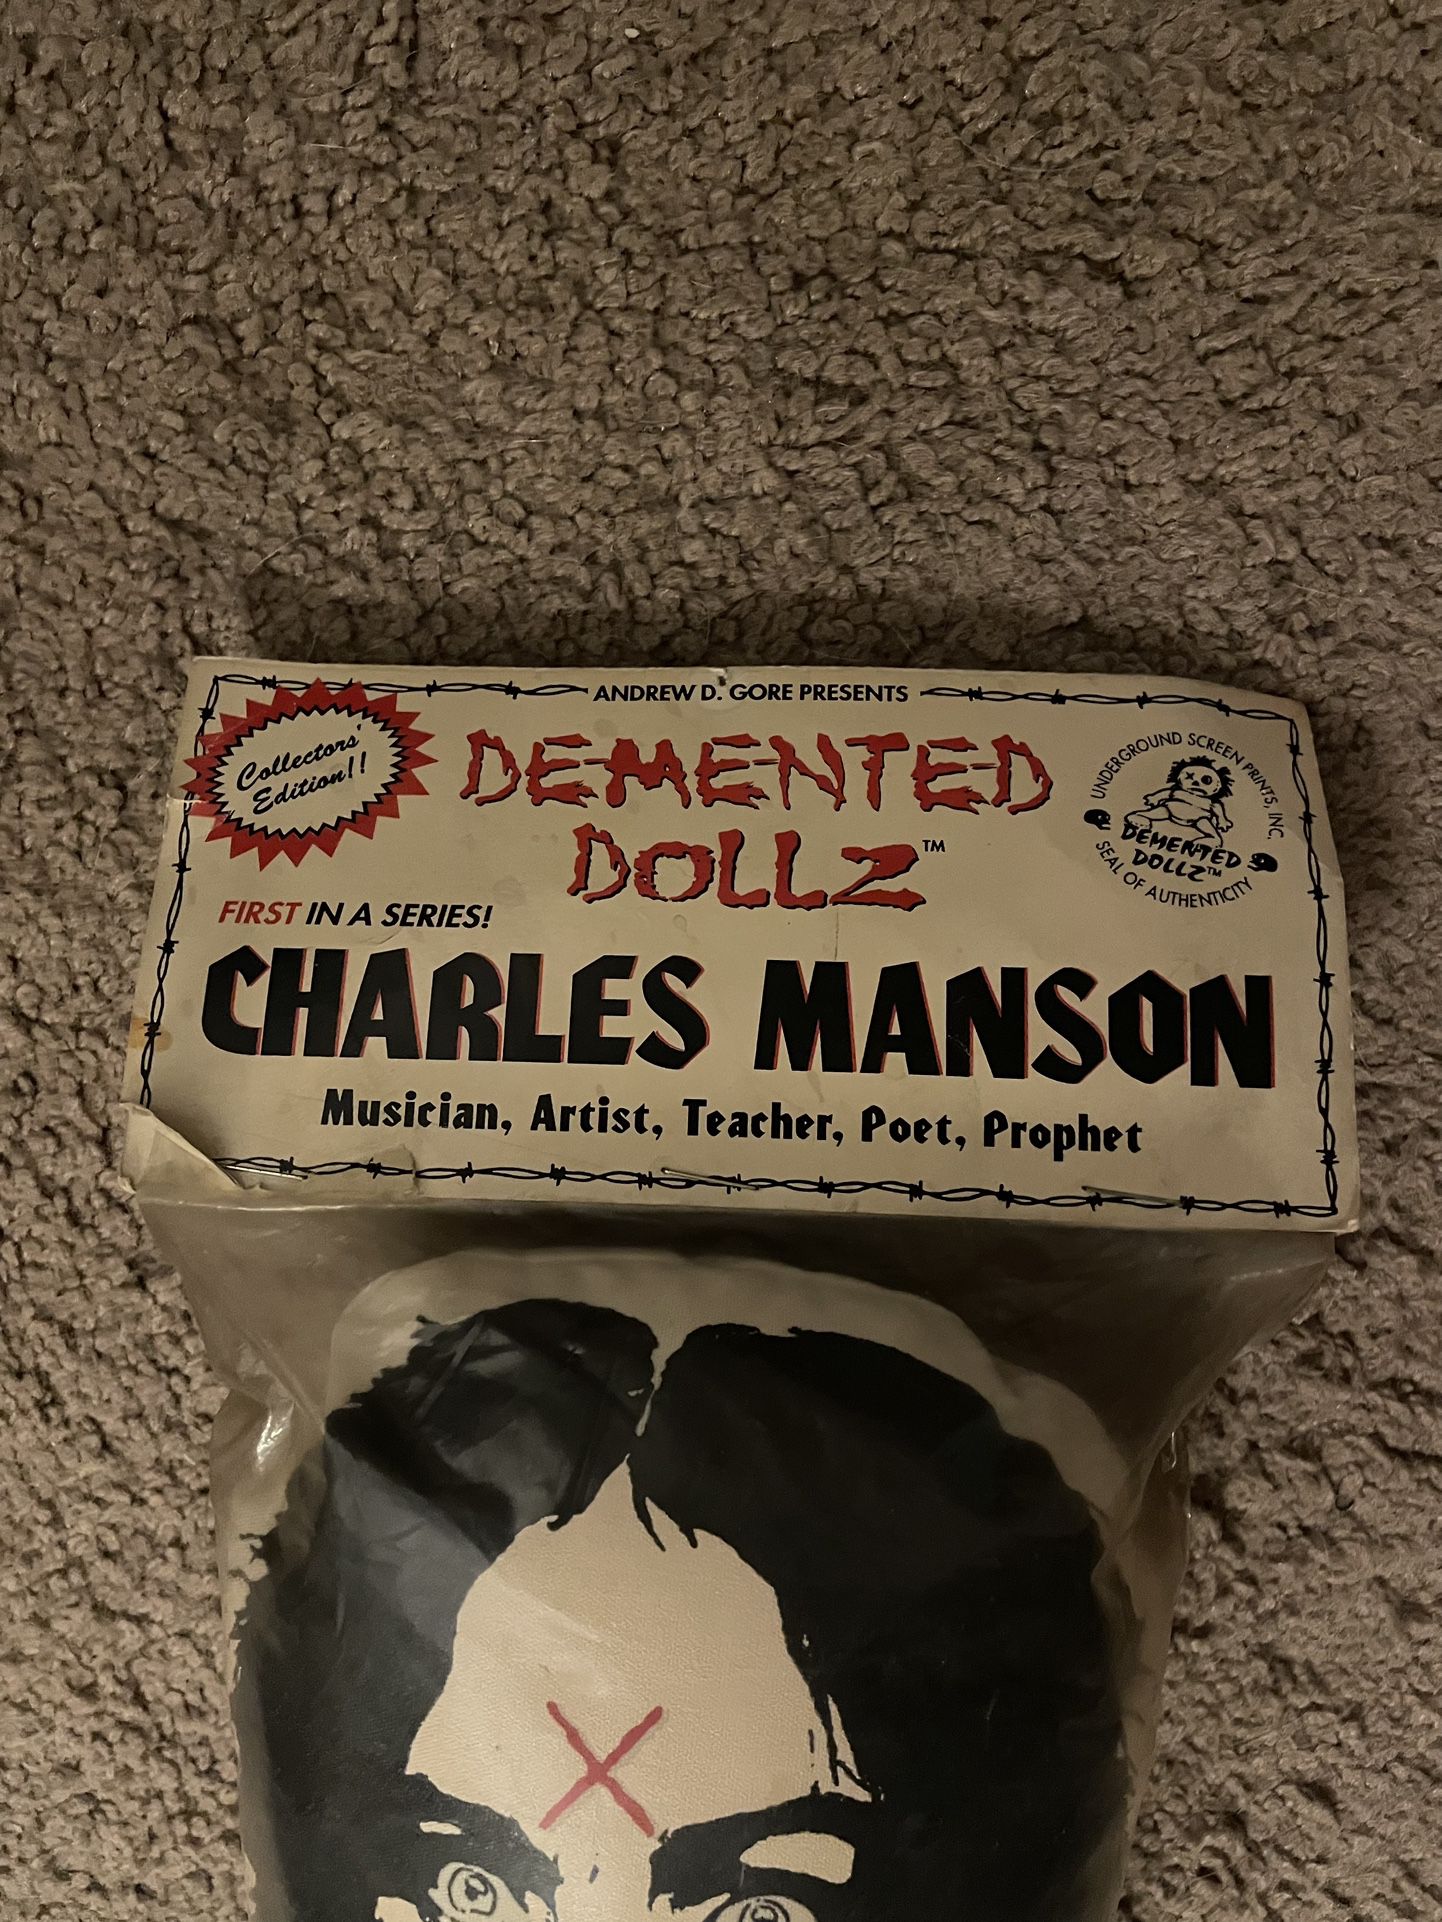 RARE VINTAGE Charles Manson Demented Dollz w/ Certificate of Authenticity (by Andrew Gore)